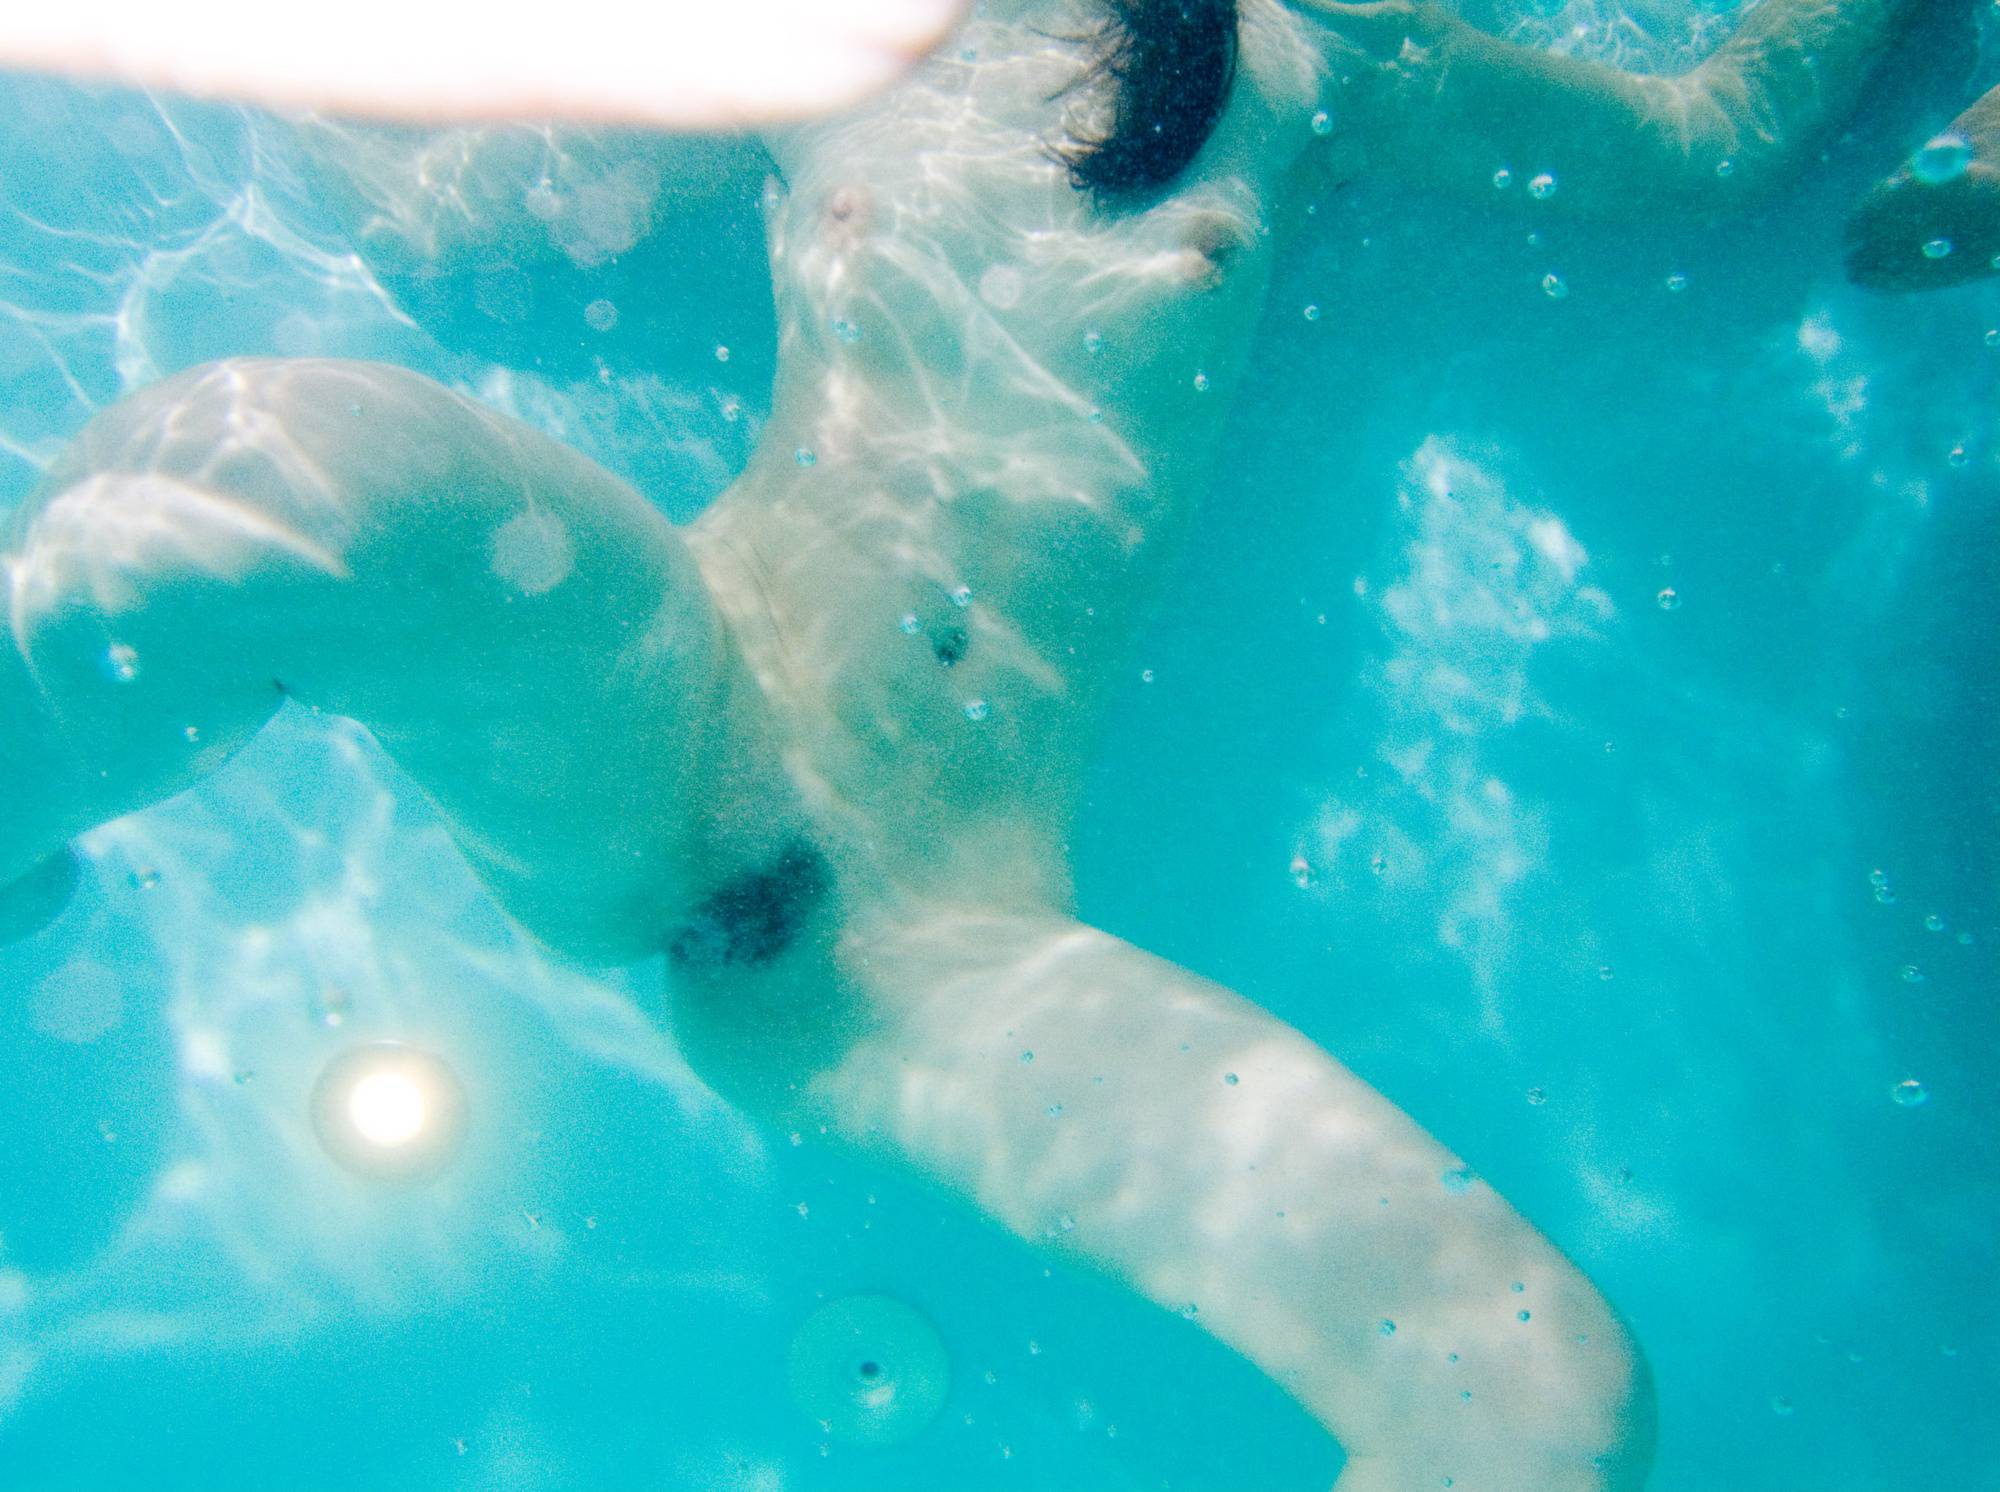 Pure Nudism Images-Soft Spa Underwater Girls - 1